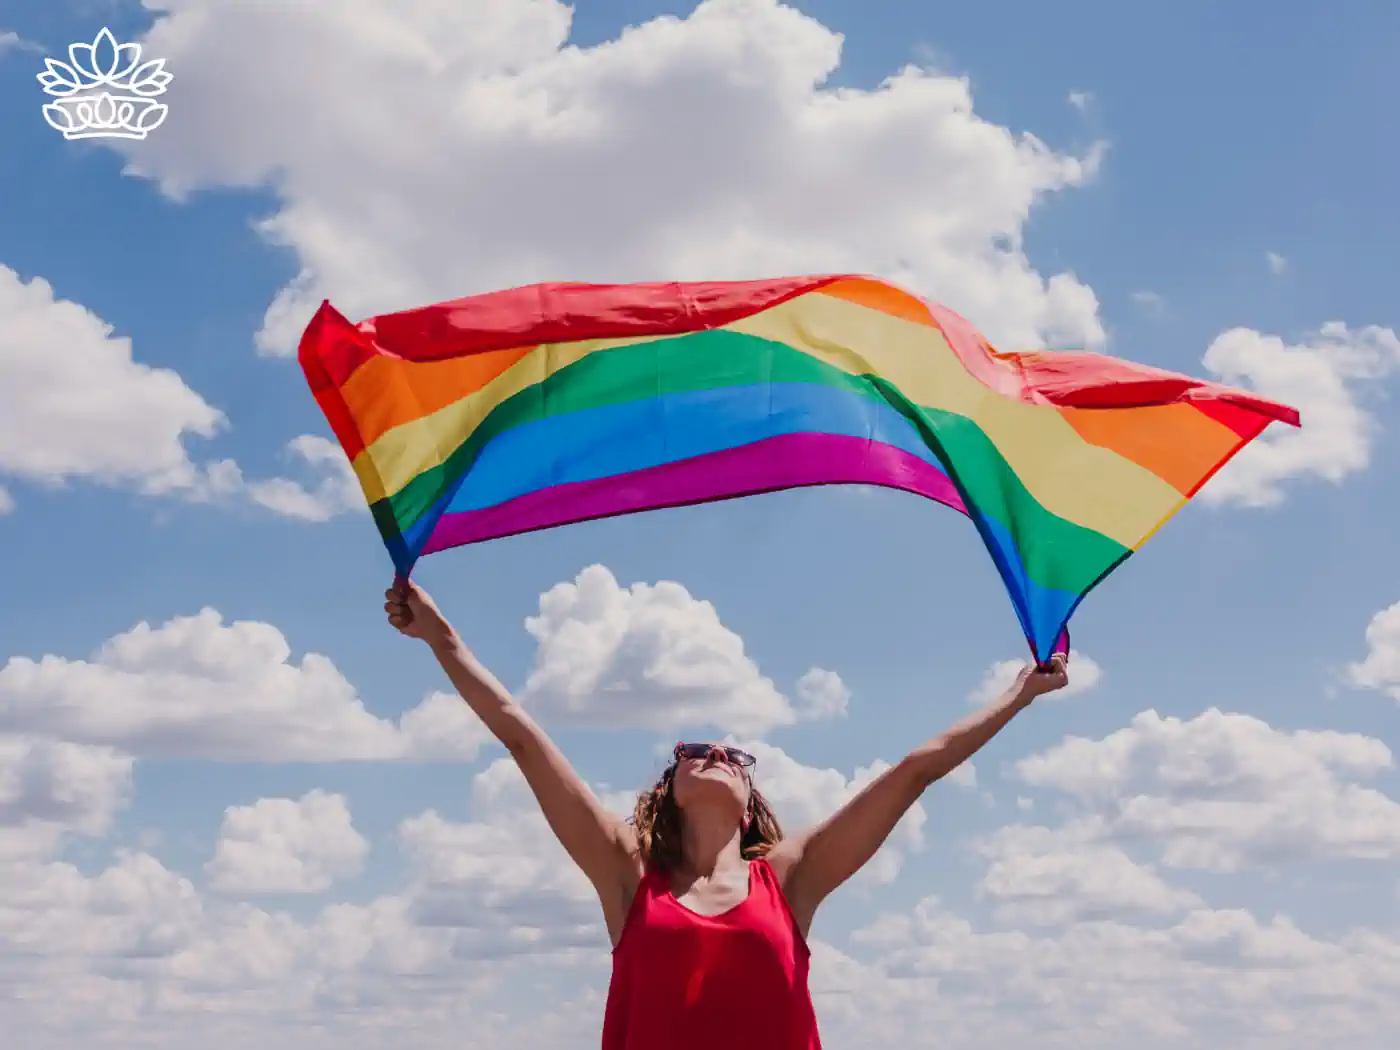 A person waving a rainbow flag under a bright blue sky, symbolizing pride and celebration. Fabulous Flowers and Gifts - Pride Collection.